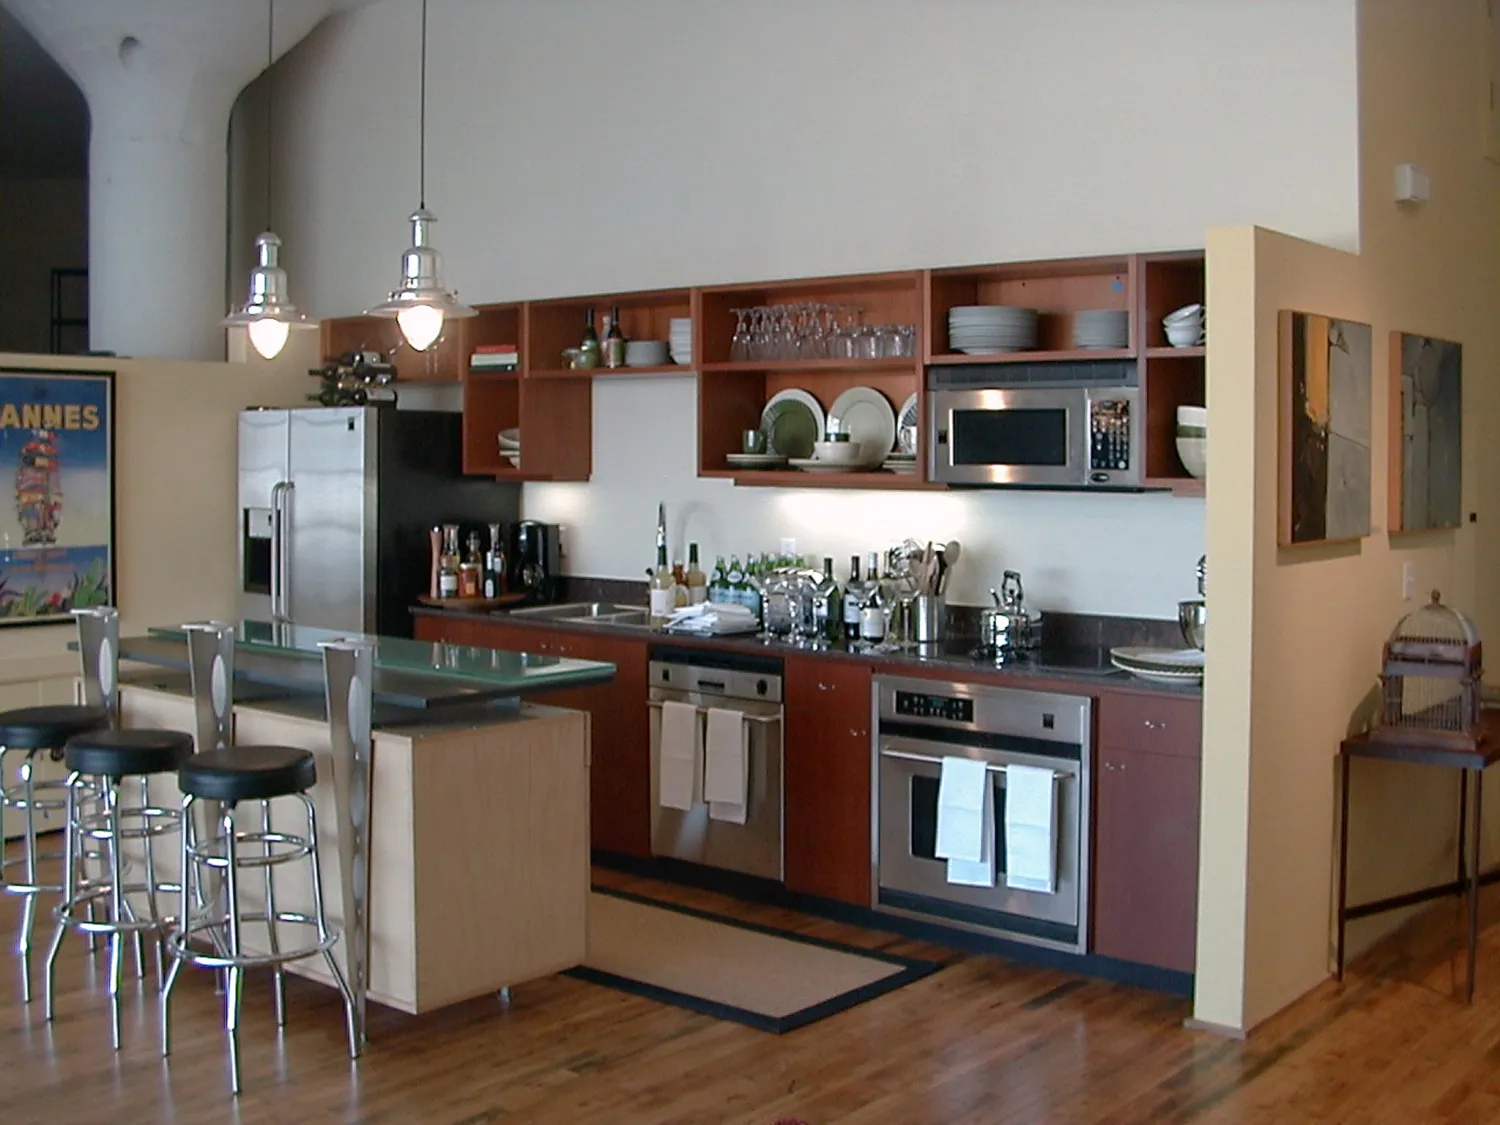 Interior view of a unit kitchen at Marquee Lofts in San Francisco.